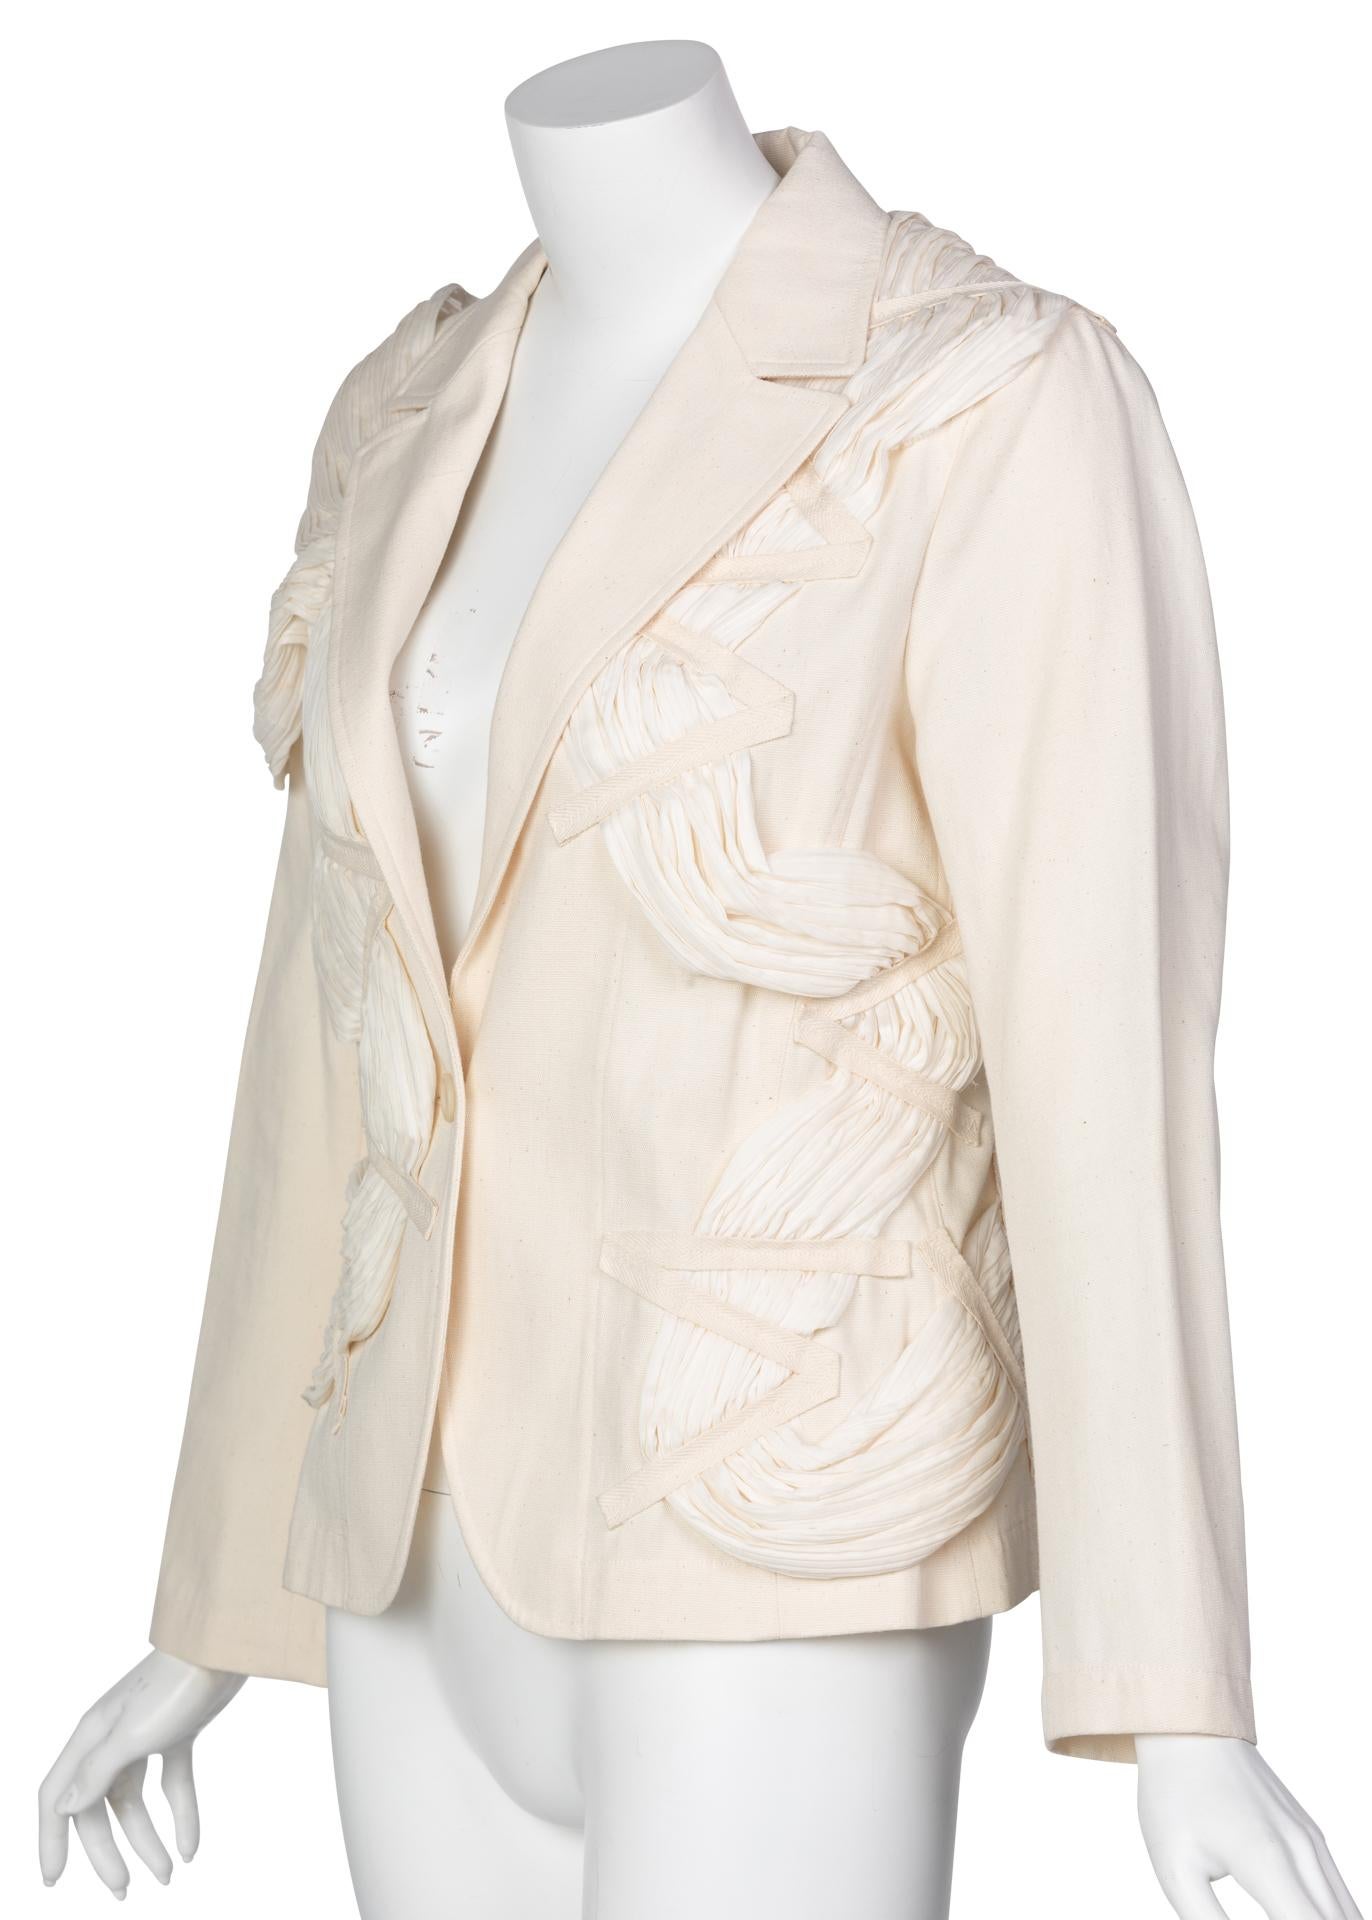 Issey Miyake S/S 2003 Runway Cream Cotton Canvas Jacket Museum Piece For Sale 5